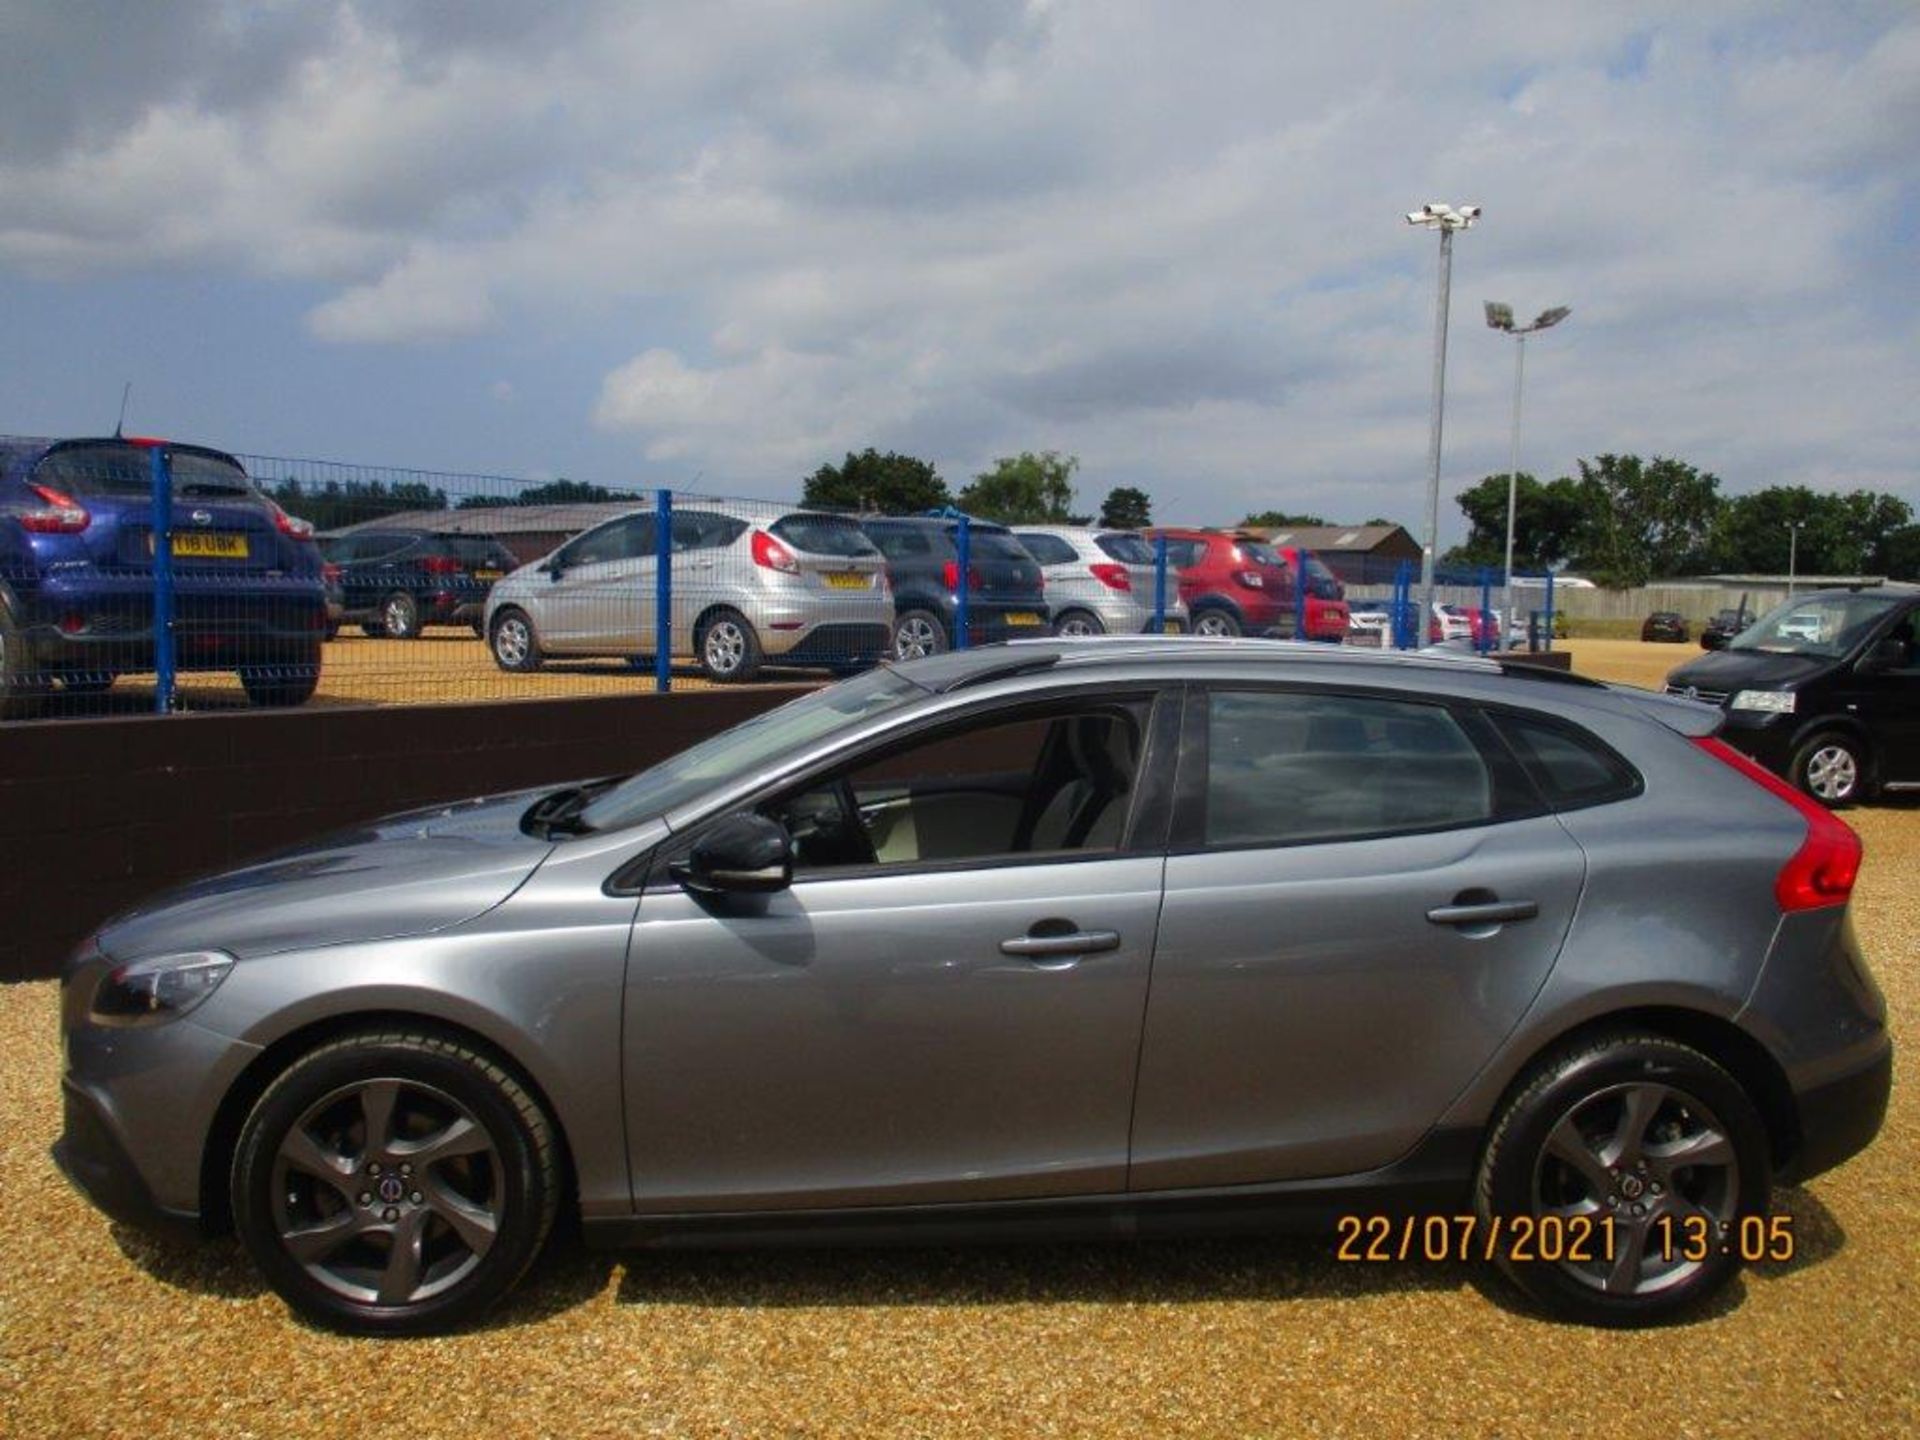 64 14 Volvo V40 Cross Country LUX - Image 2 of 26